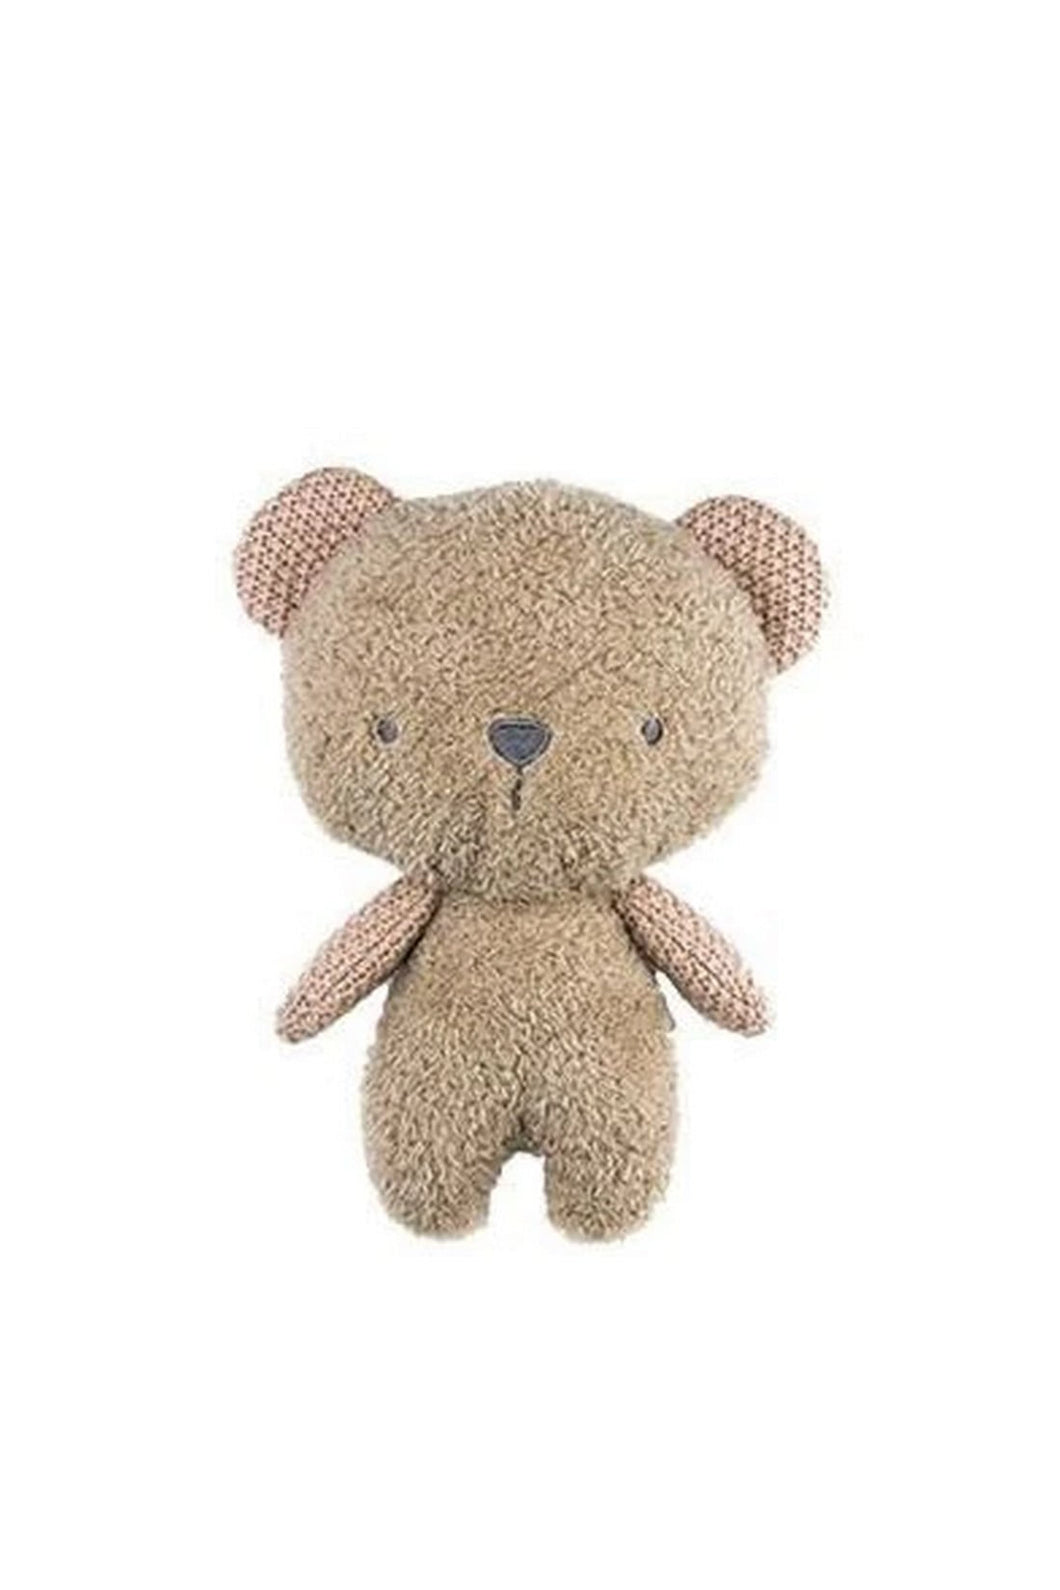 Bubble Knitted Plush Cuddly Toy - Beanie The Bear